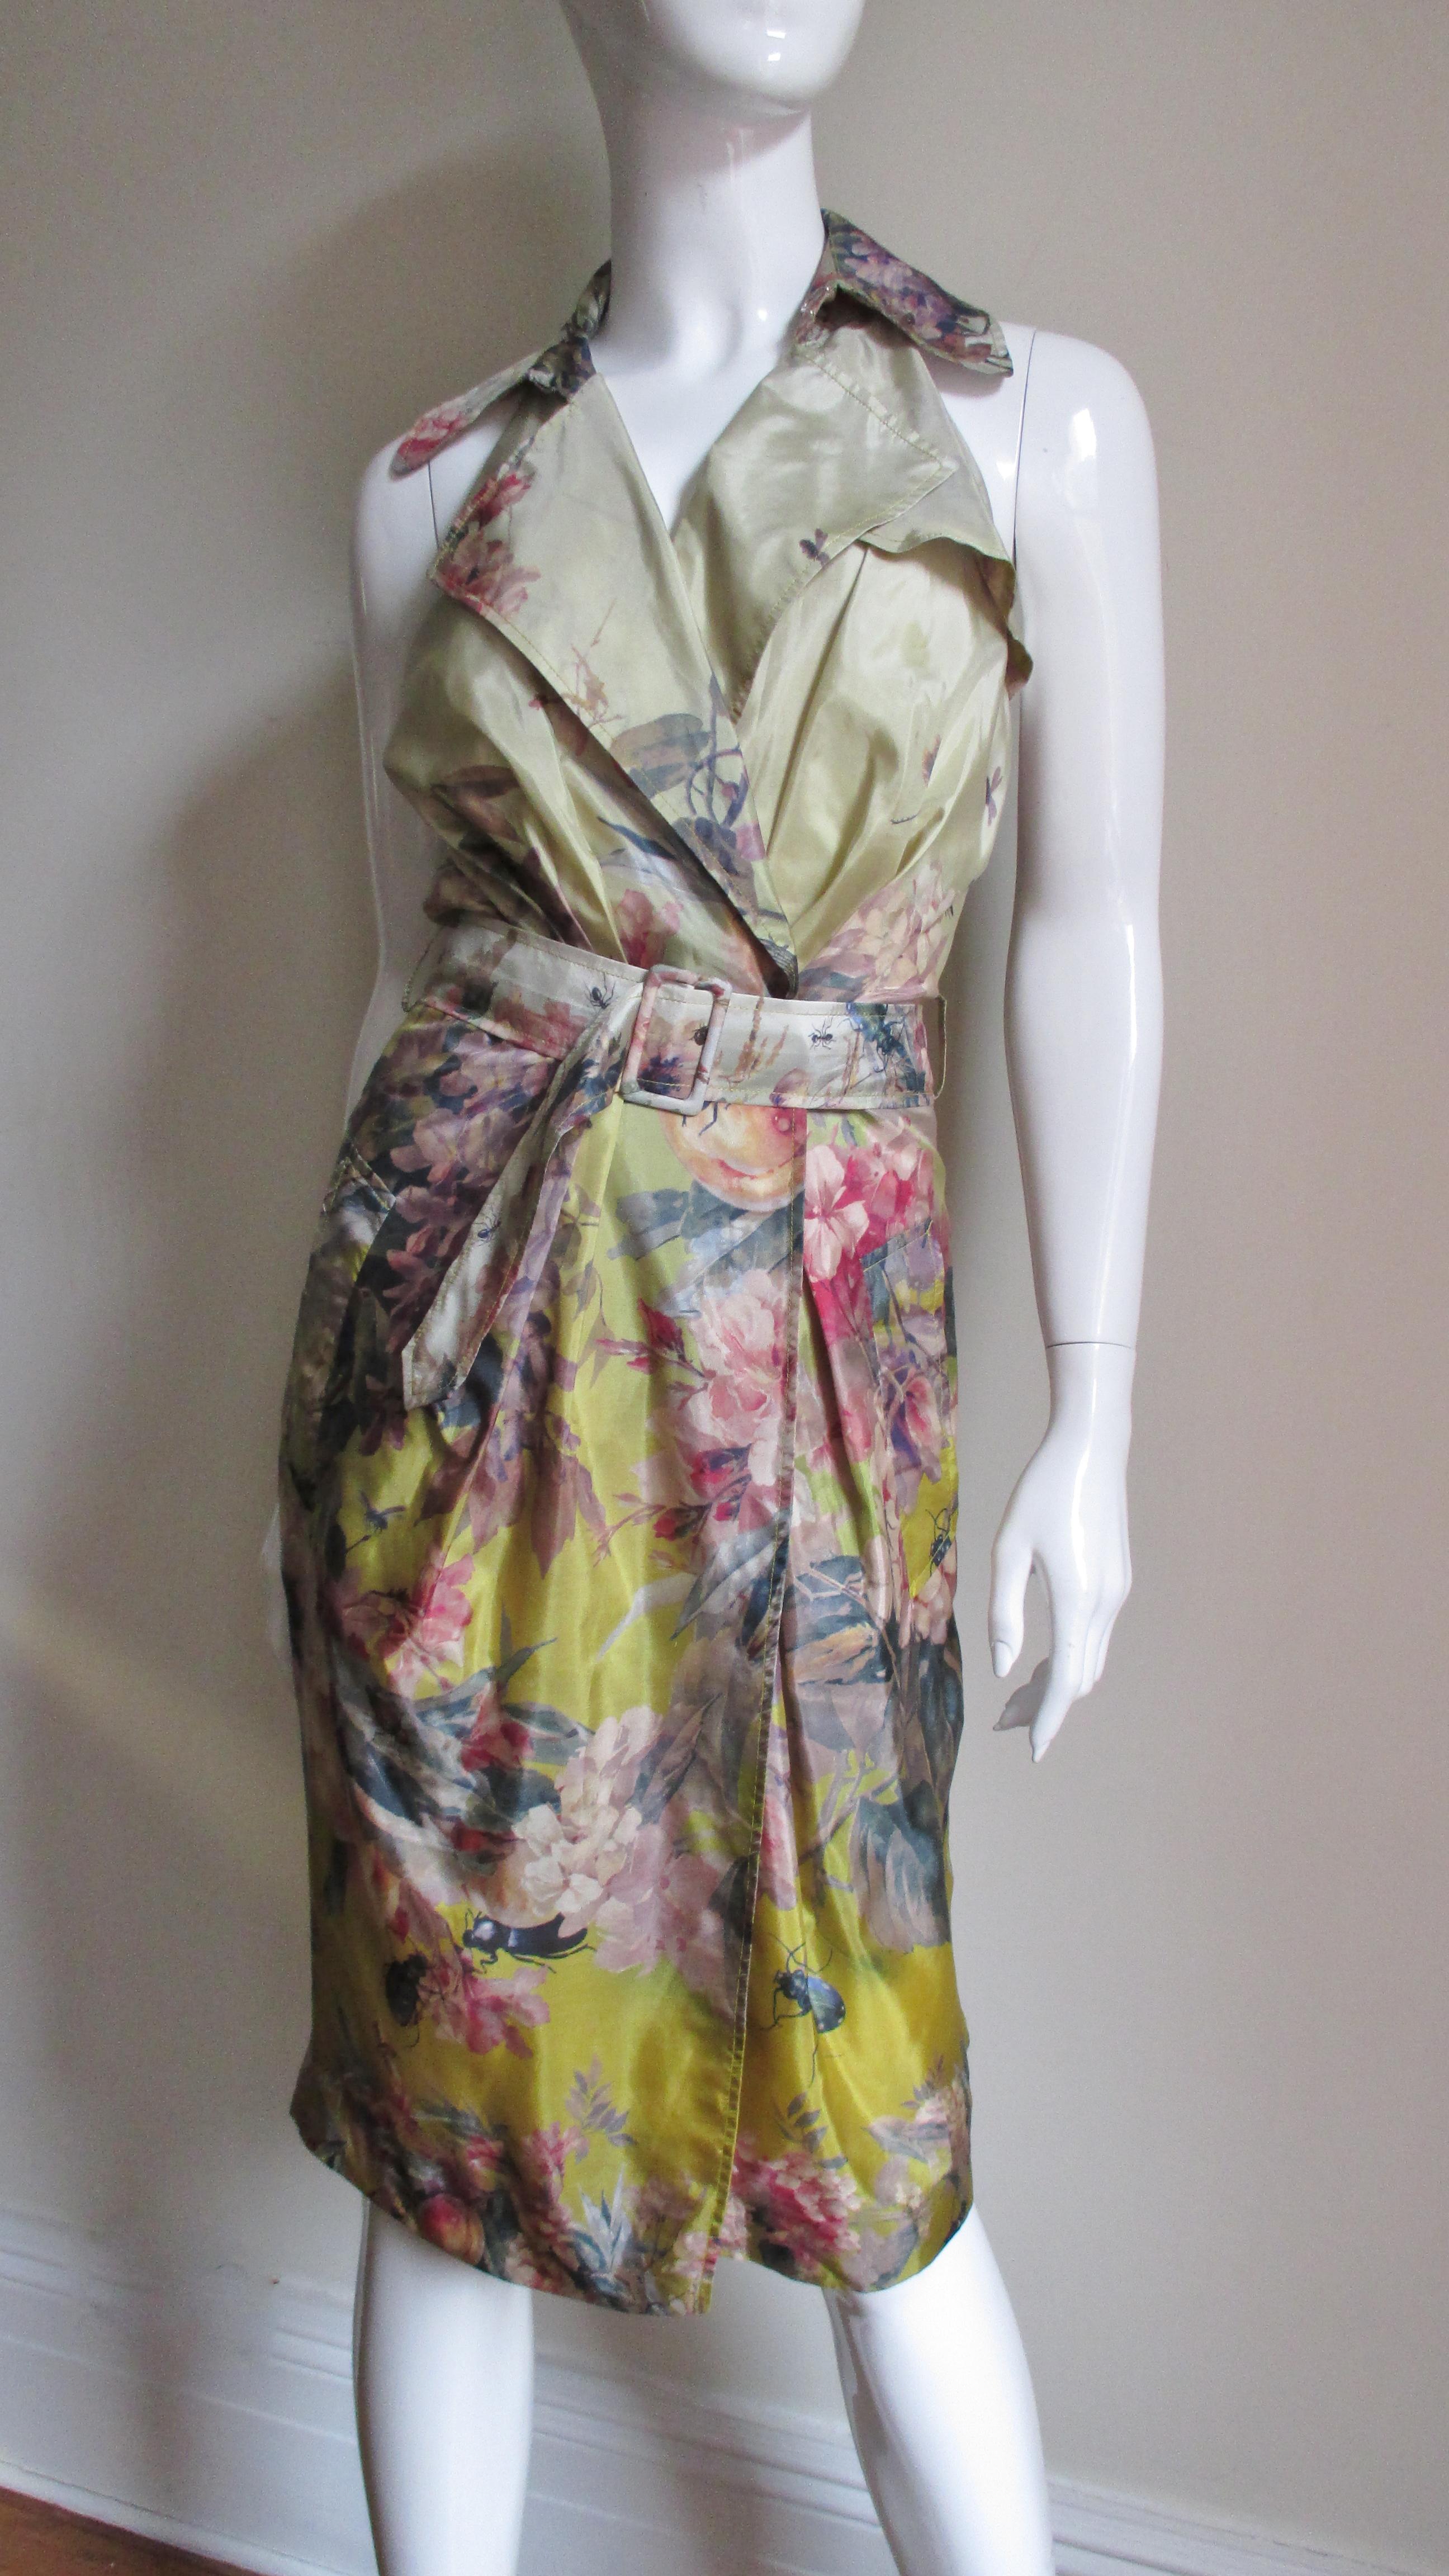 A fabulous silk dress from Jean Paul Gaultier covered in ants, beetles, dragonflies and flowers in shades of green, gold, coral, pink, off white on a yellow ombre background which is lighter on the top increasing in color extending down to the hem.